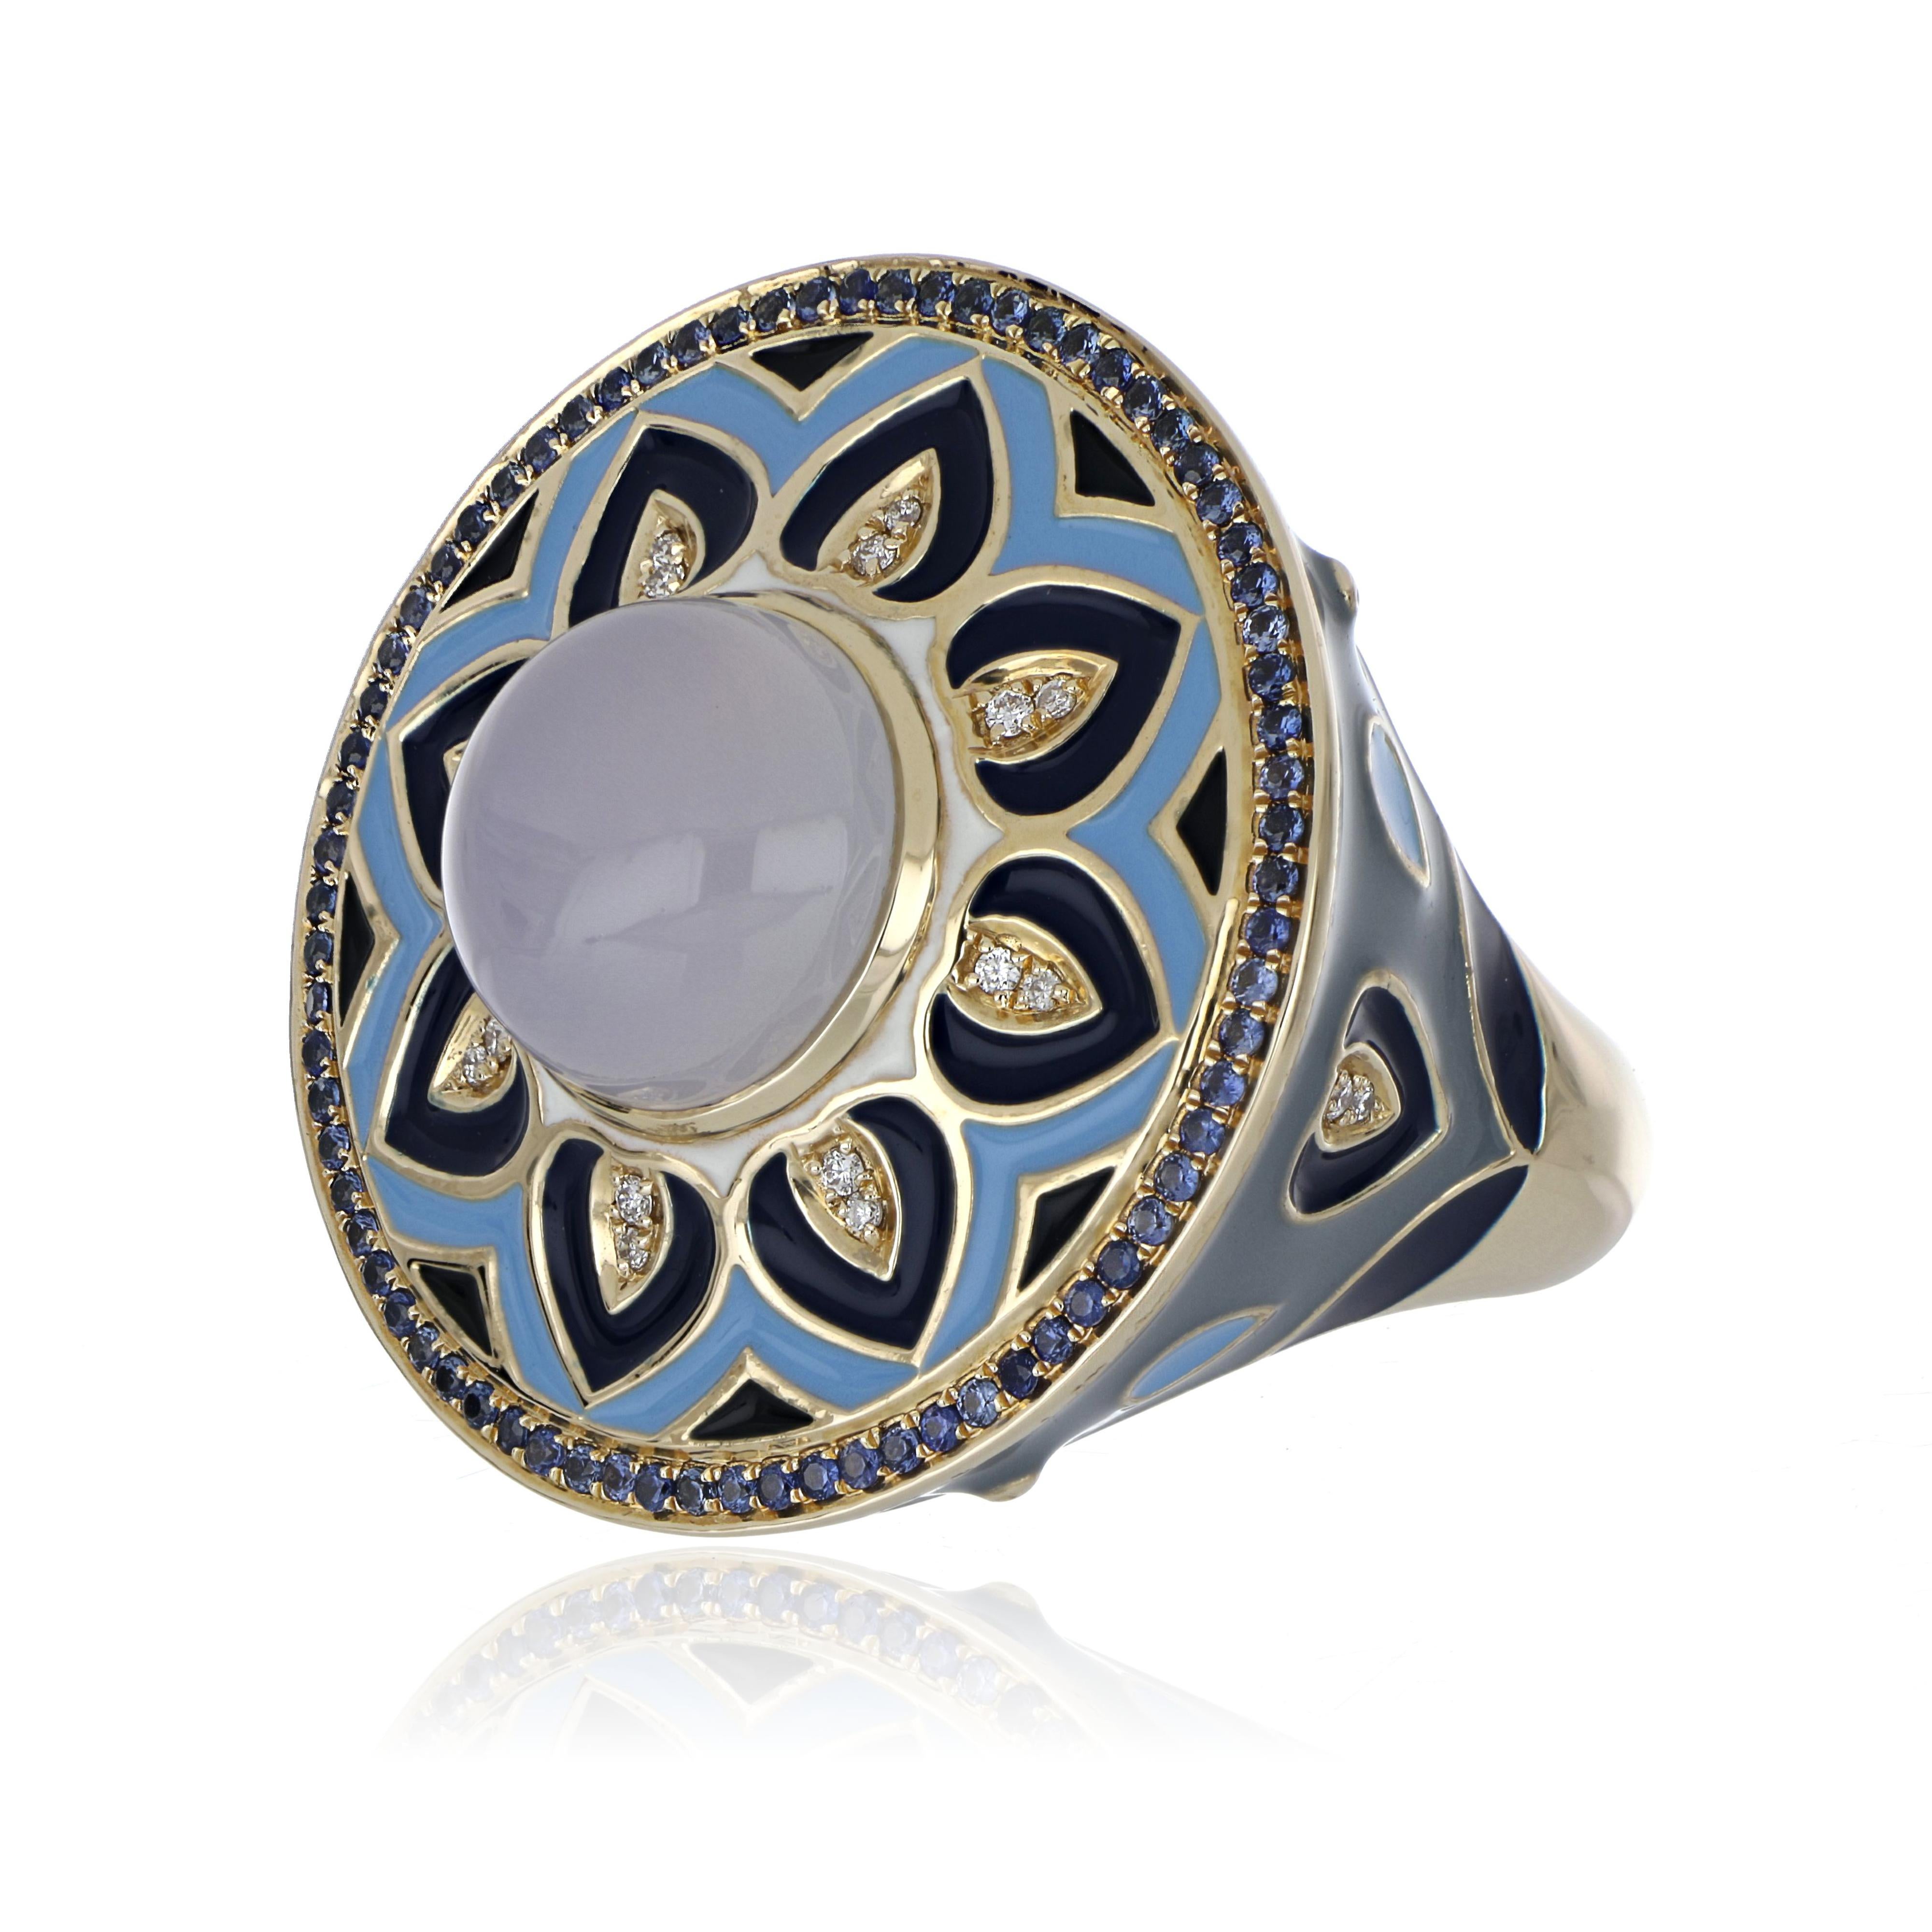 Elegant and exquisite Enamel Cocktail 14 K Ring, center set with 4.10 Cts. Cabochon Cut Blue Chalcedony Round . Surrounded with Blue Sapphire Rounds 0.43 Cts. accented with Diamonds, weighing approx. 0.08 cts. Beautifully Hand crafted in 14 Karat